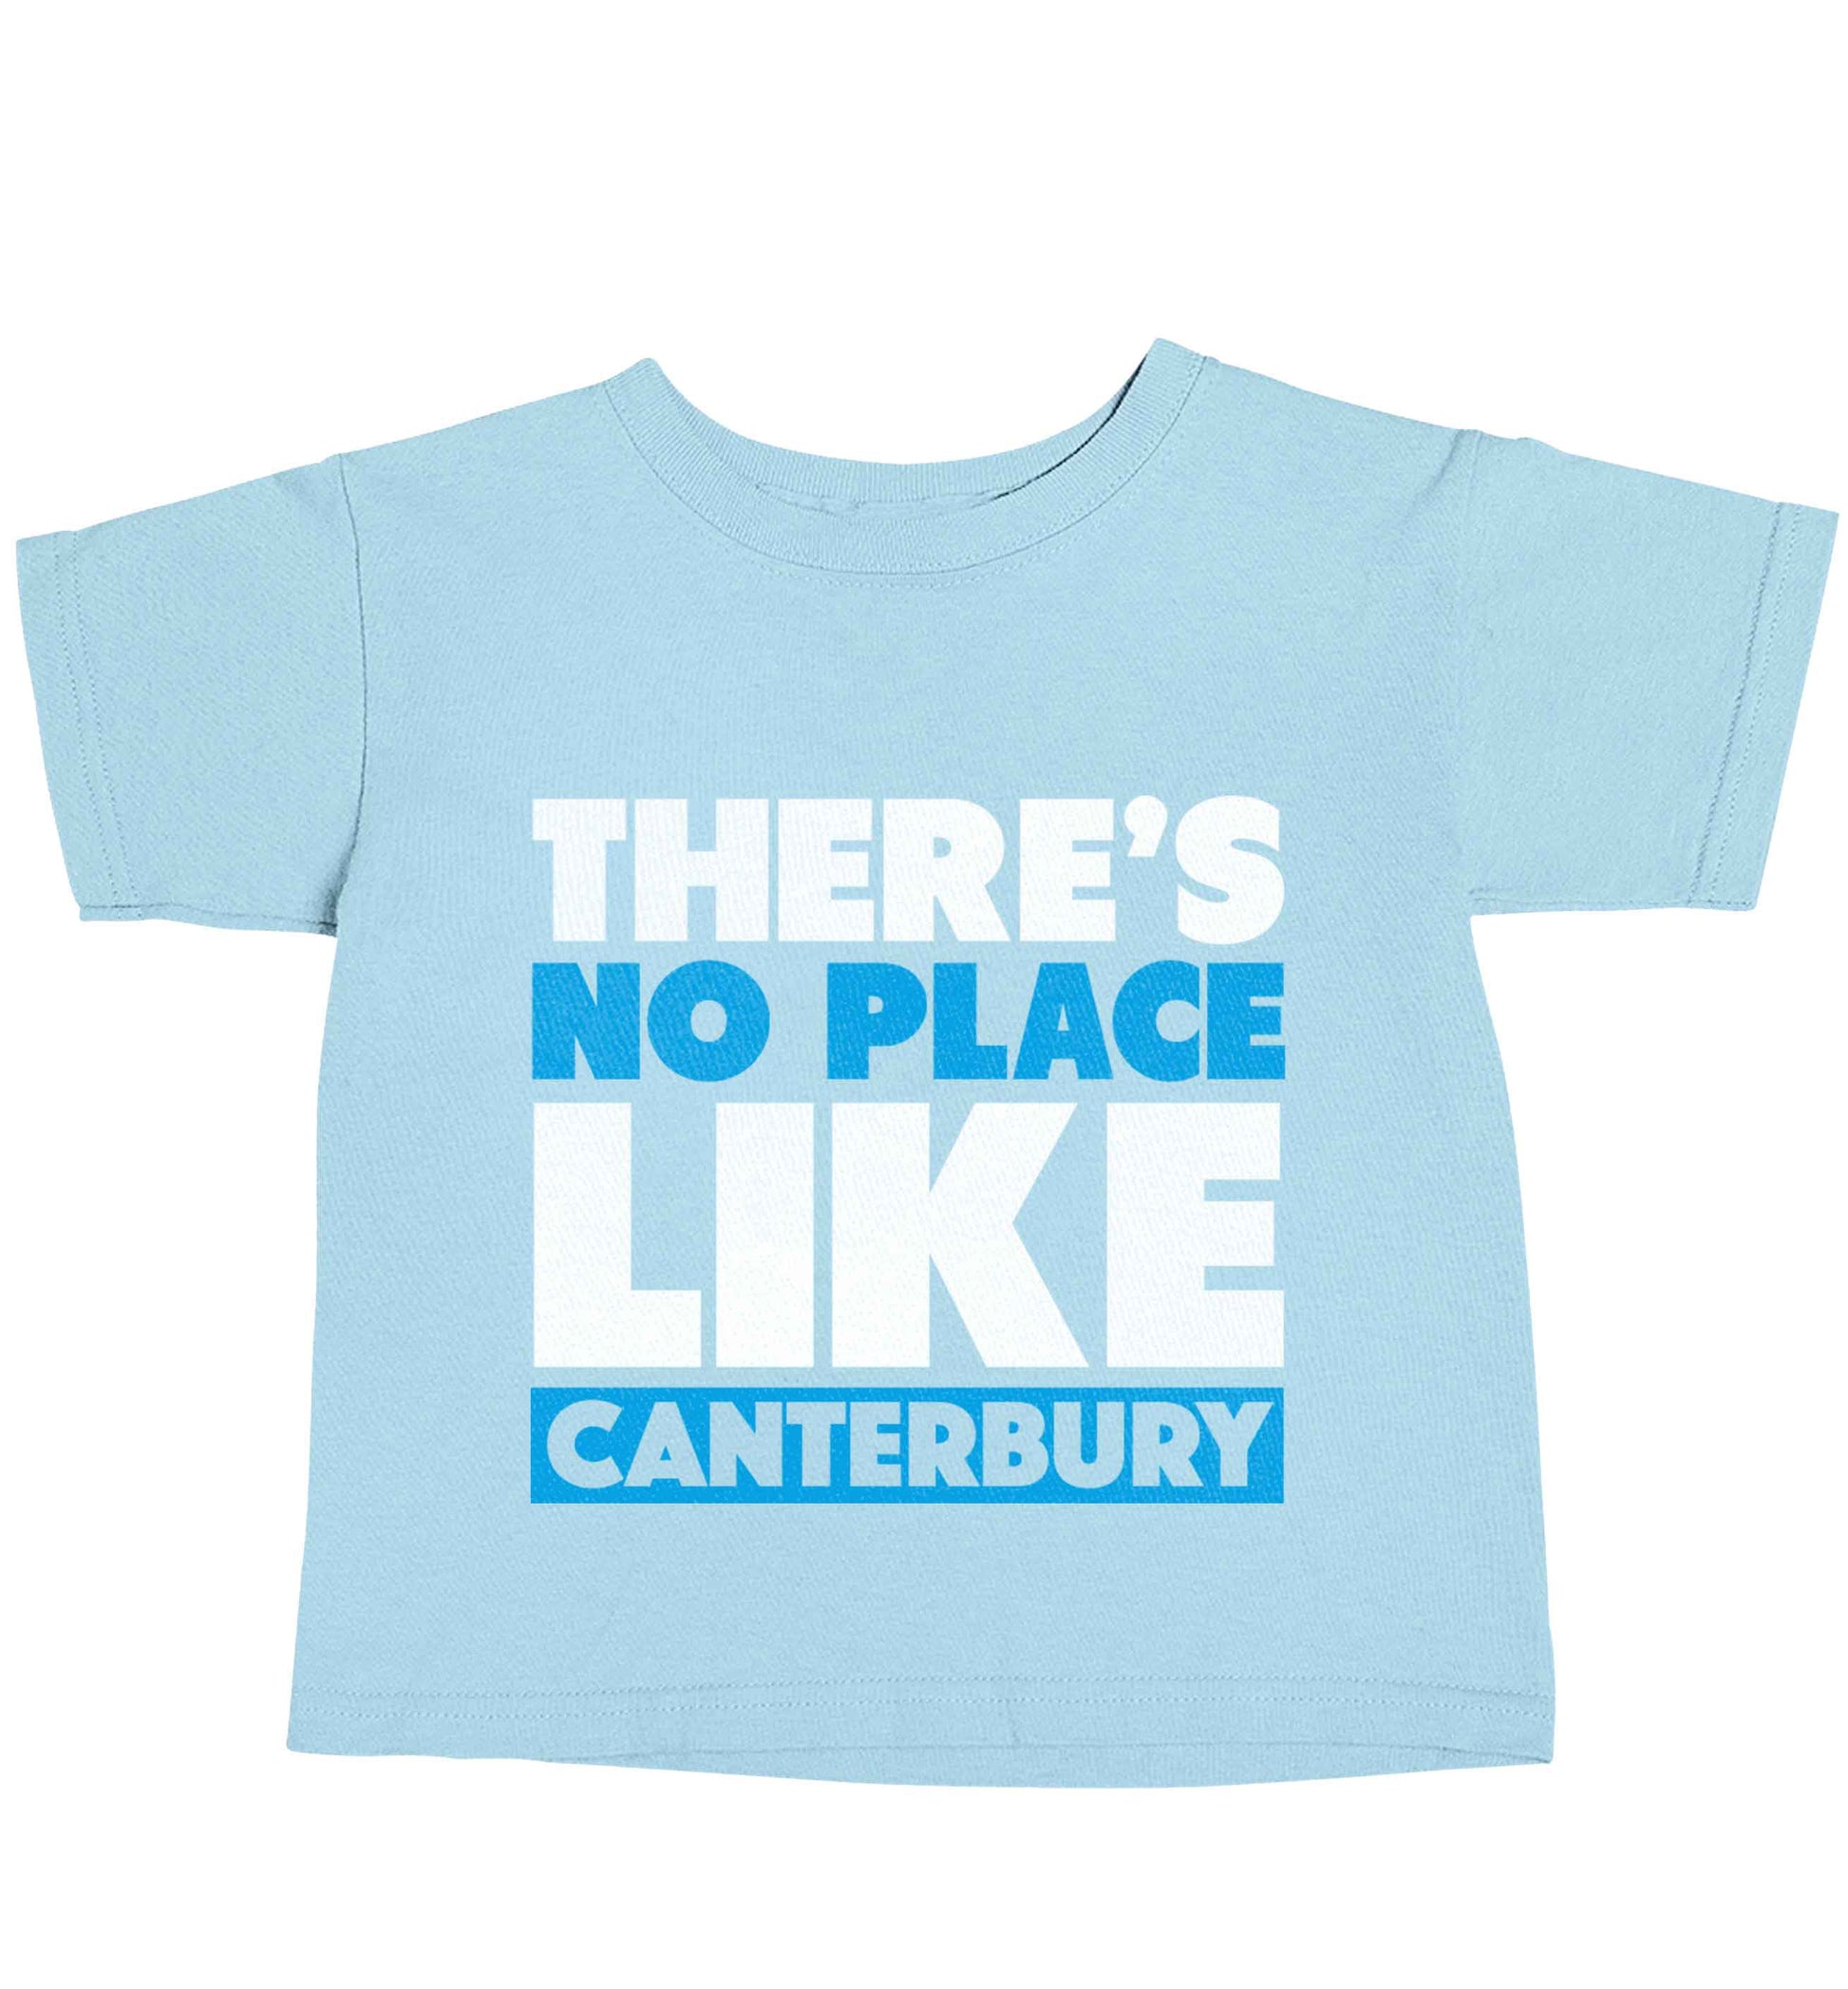 There's no place like Canterbury light blue baby toddler Tshirt 2 Years